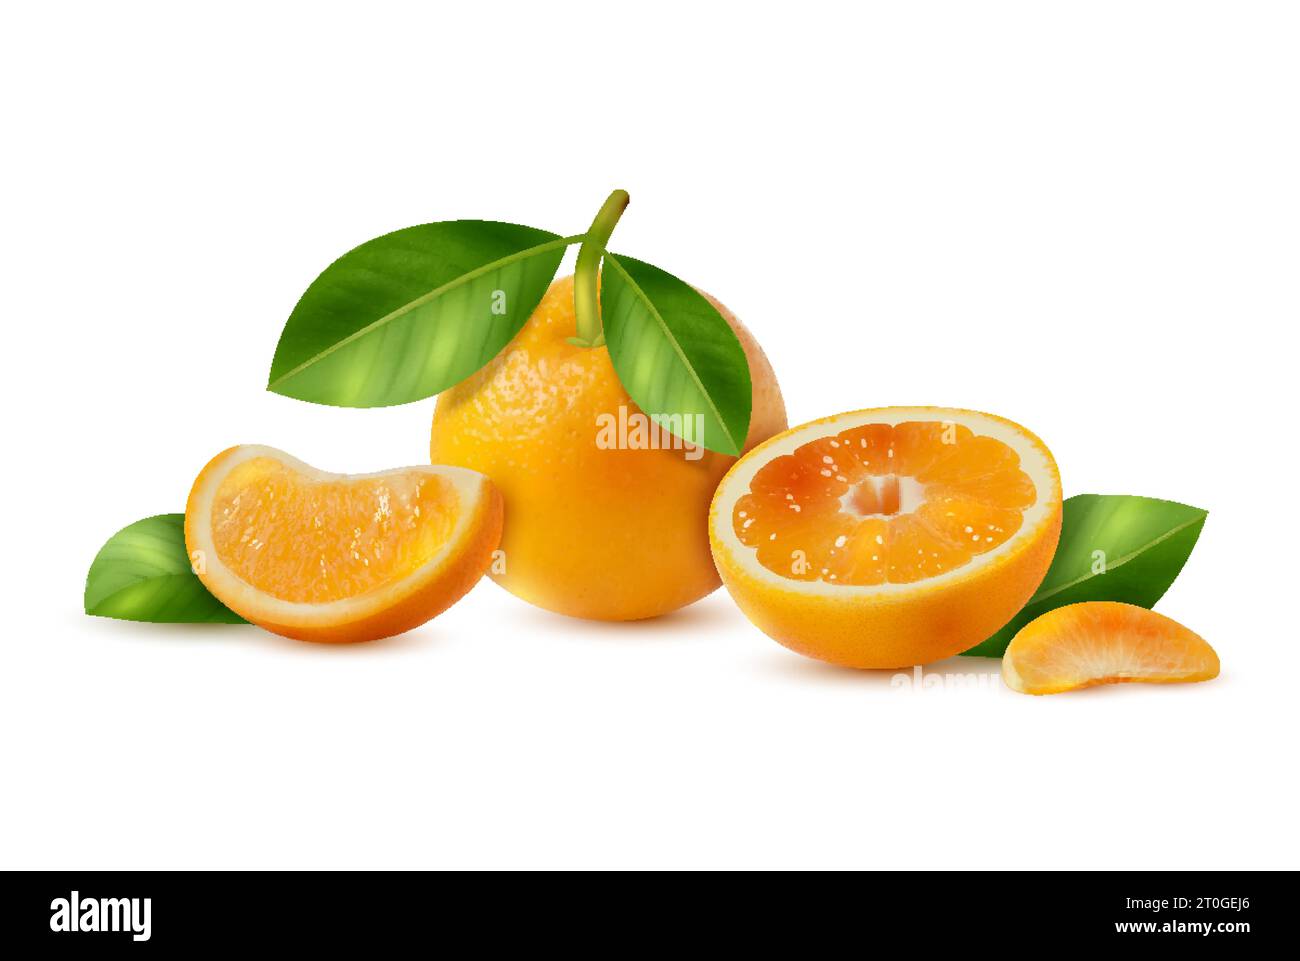 Realistic fresh juicy oranges with slices and green leaves against white background vector illustration Stock Vector